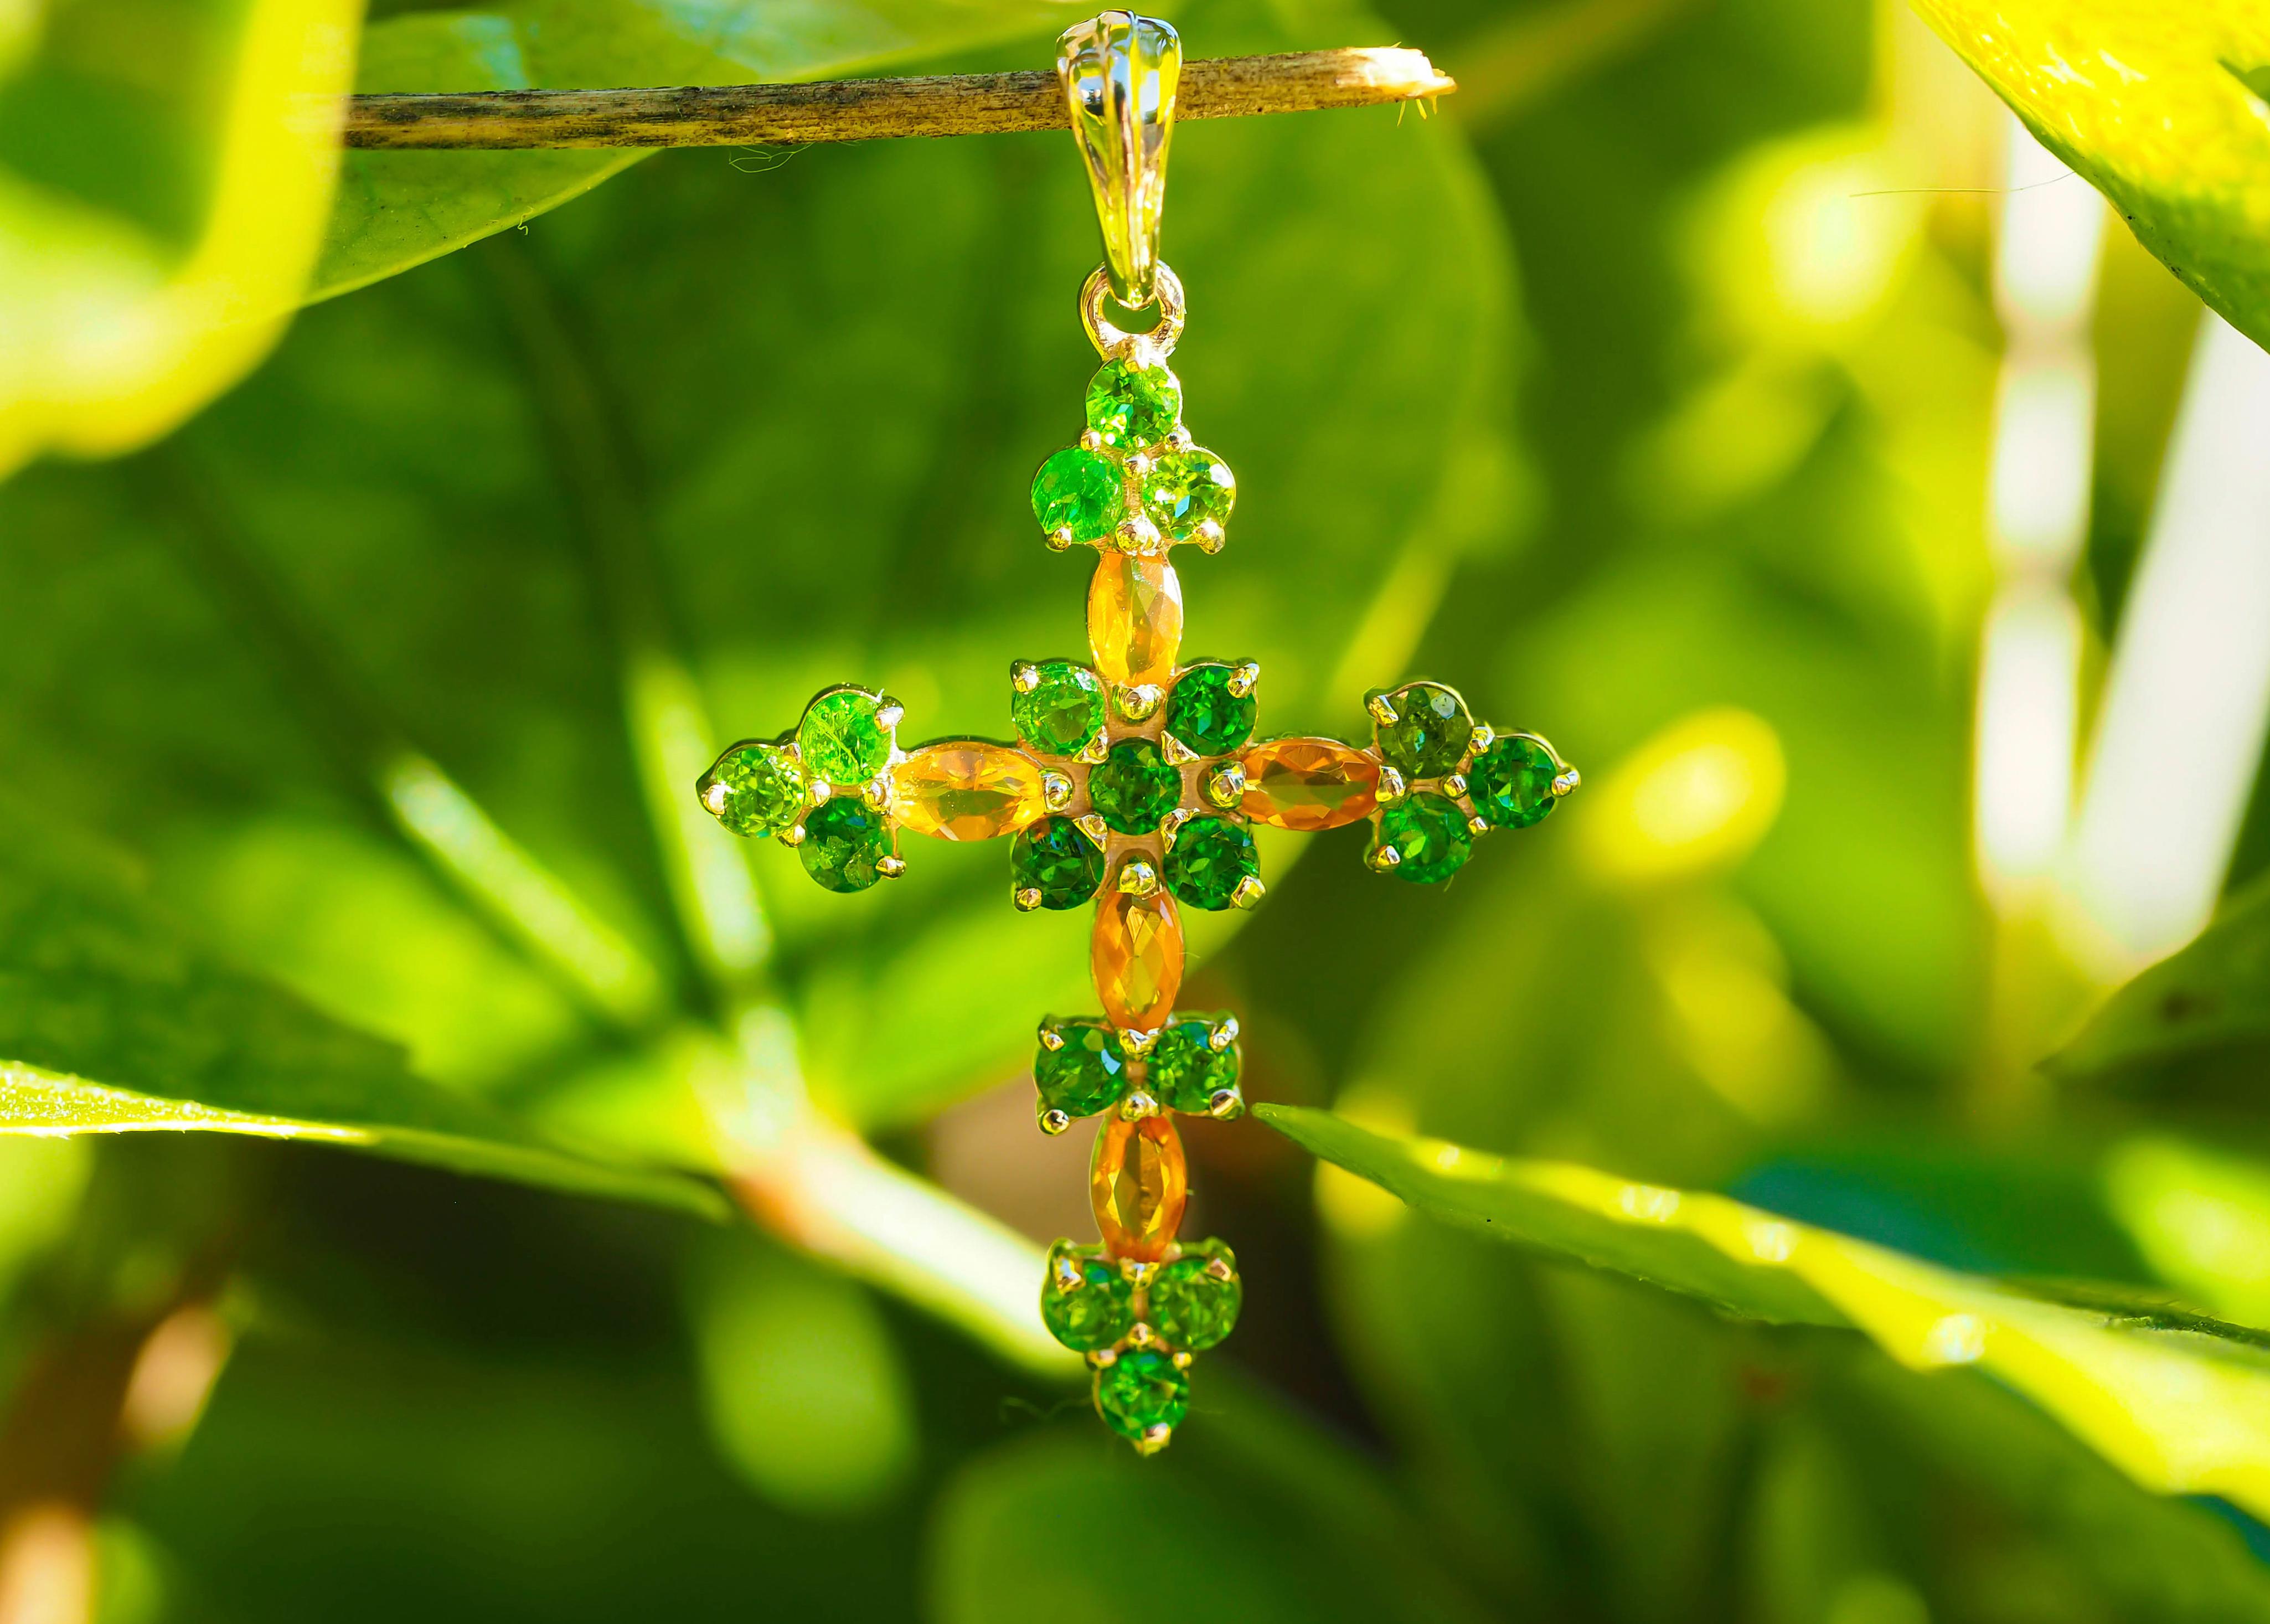 Cross pendant with colored stones: natural fire opals and tsavorite (green garnet).
Weight: 1.9 g.
Gold: 14kt solid yellow gold
Size: 31 x 19 mm.
Natural stones:
1. Tsavorite garnet: round cut, green color, transparent, approx 0.50 ct (18 pieces